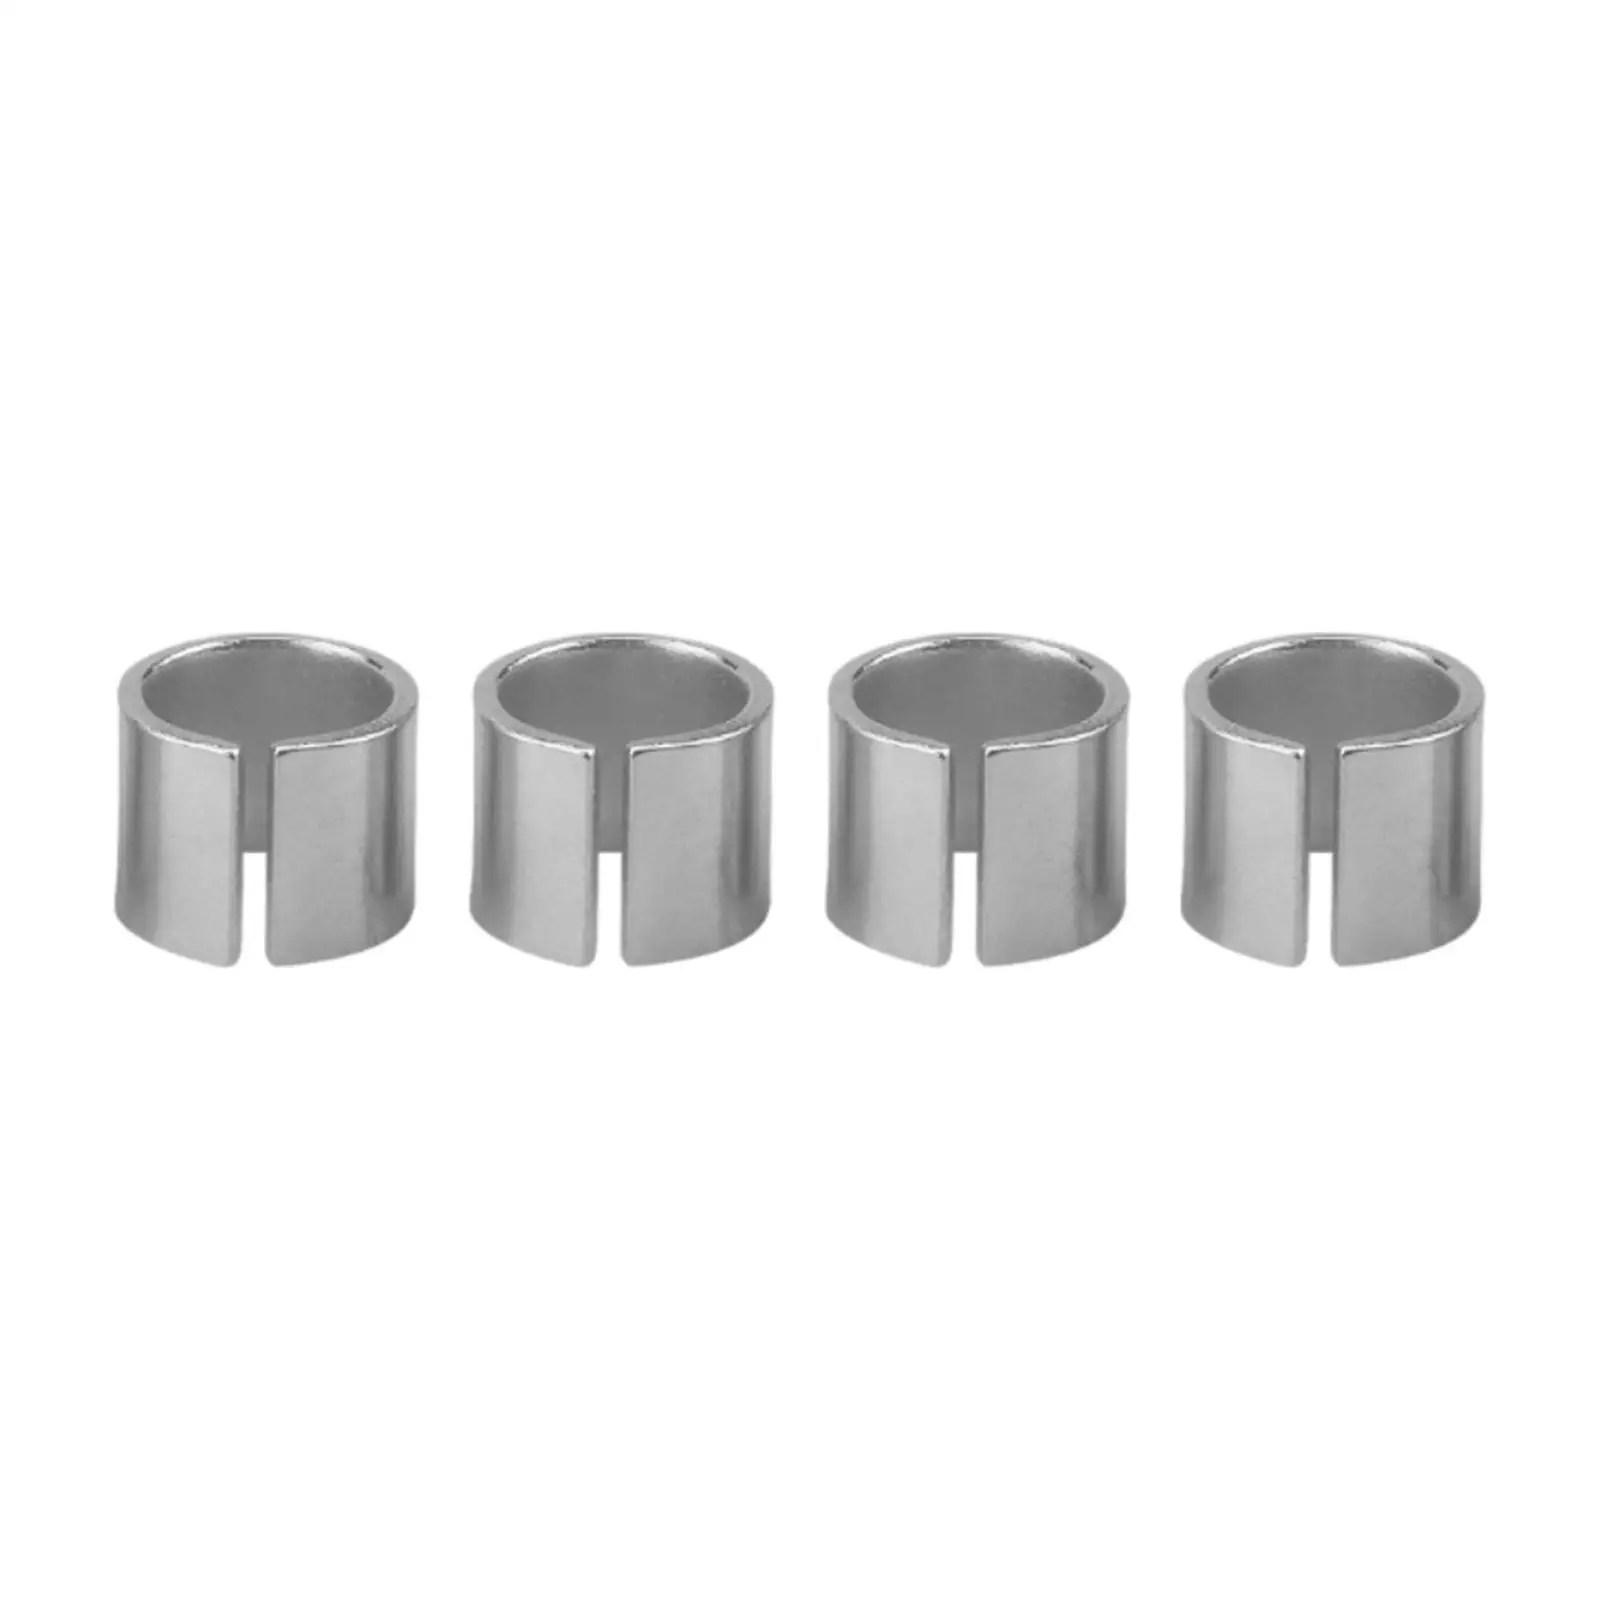 4 Pieces Cylinder Head Dowel Pin Durable replace Chevy ls LT Accessories L86 L87 lt L8B L92 L99 L33 LR4 Lq9 LS6